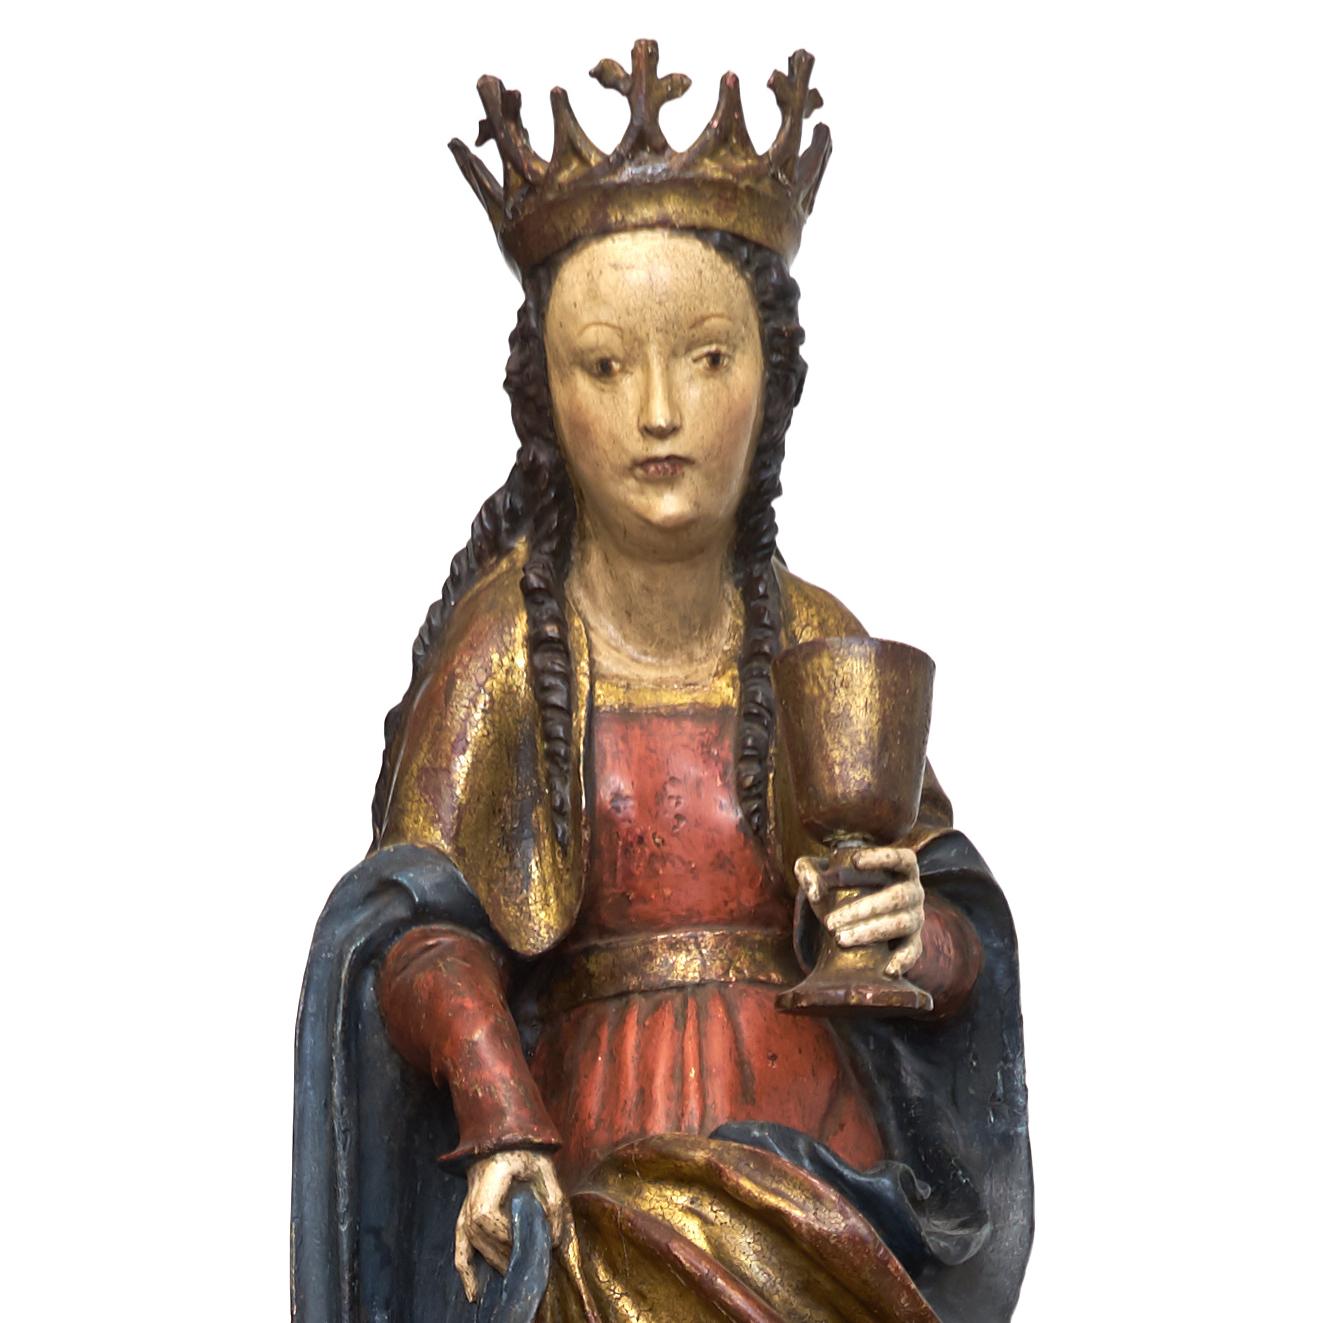 A rare and very fine South German or Austrian Gothic, circa 1500. Polychrome and gilt pinewood sculpture of Maria Magdalena. Maria depicted standing in contrapost, with fine facial features and long curly hair running over her shoulders, wearing a